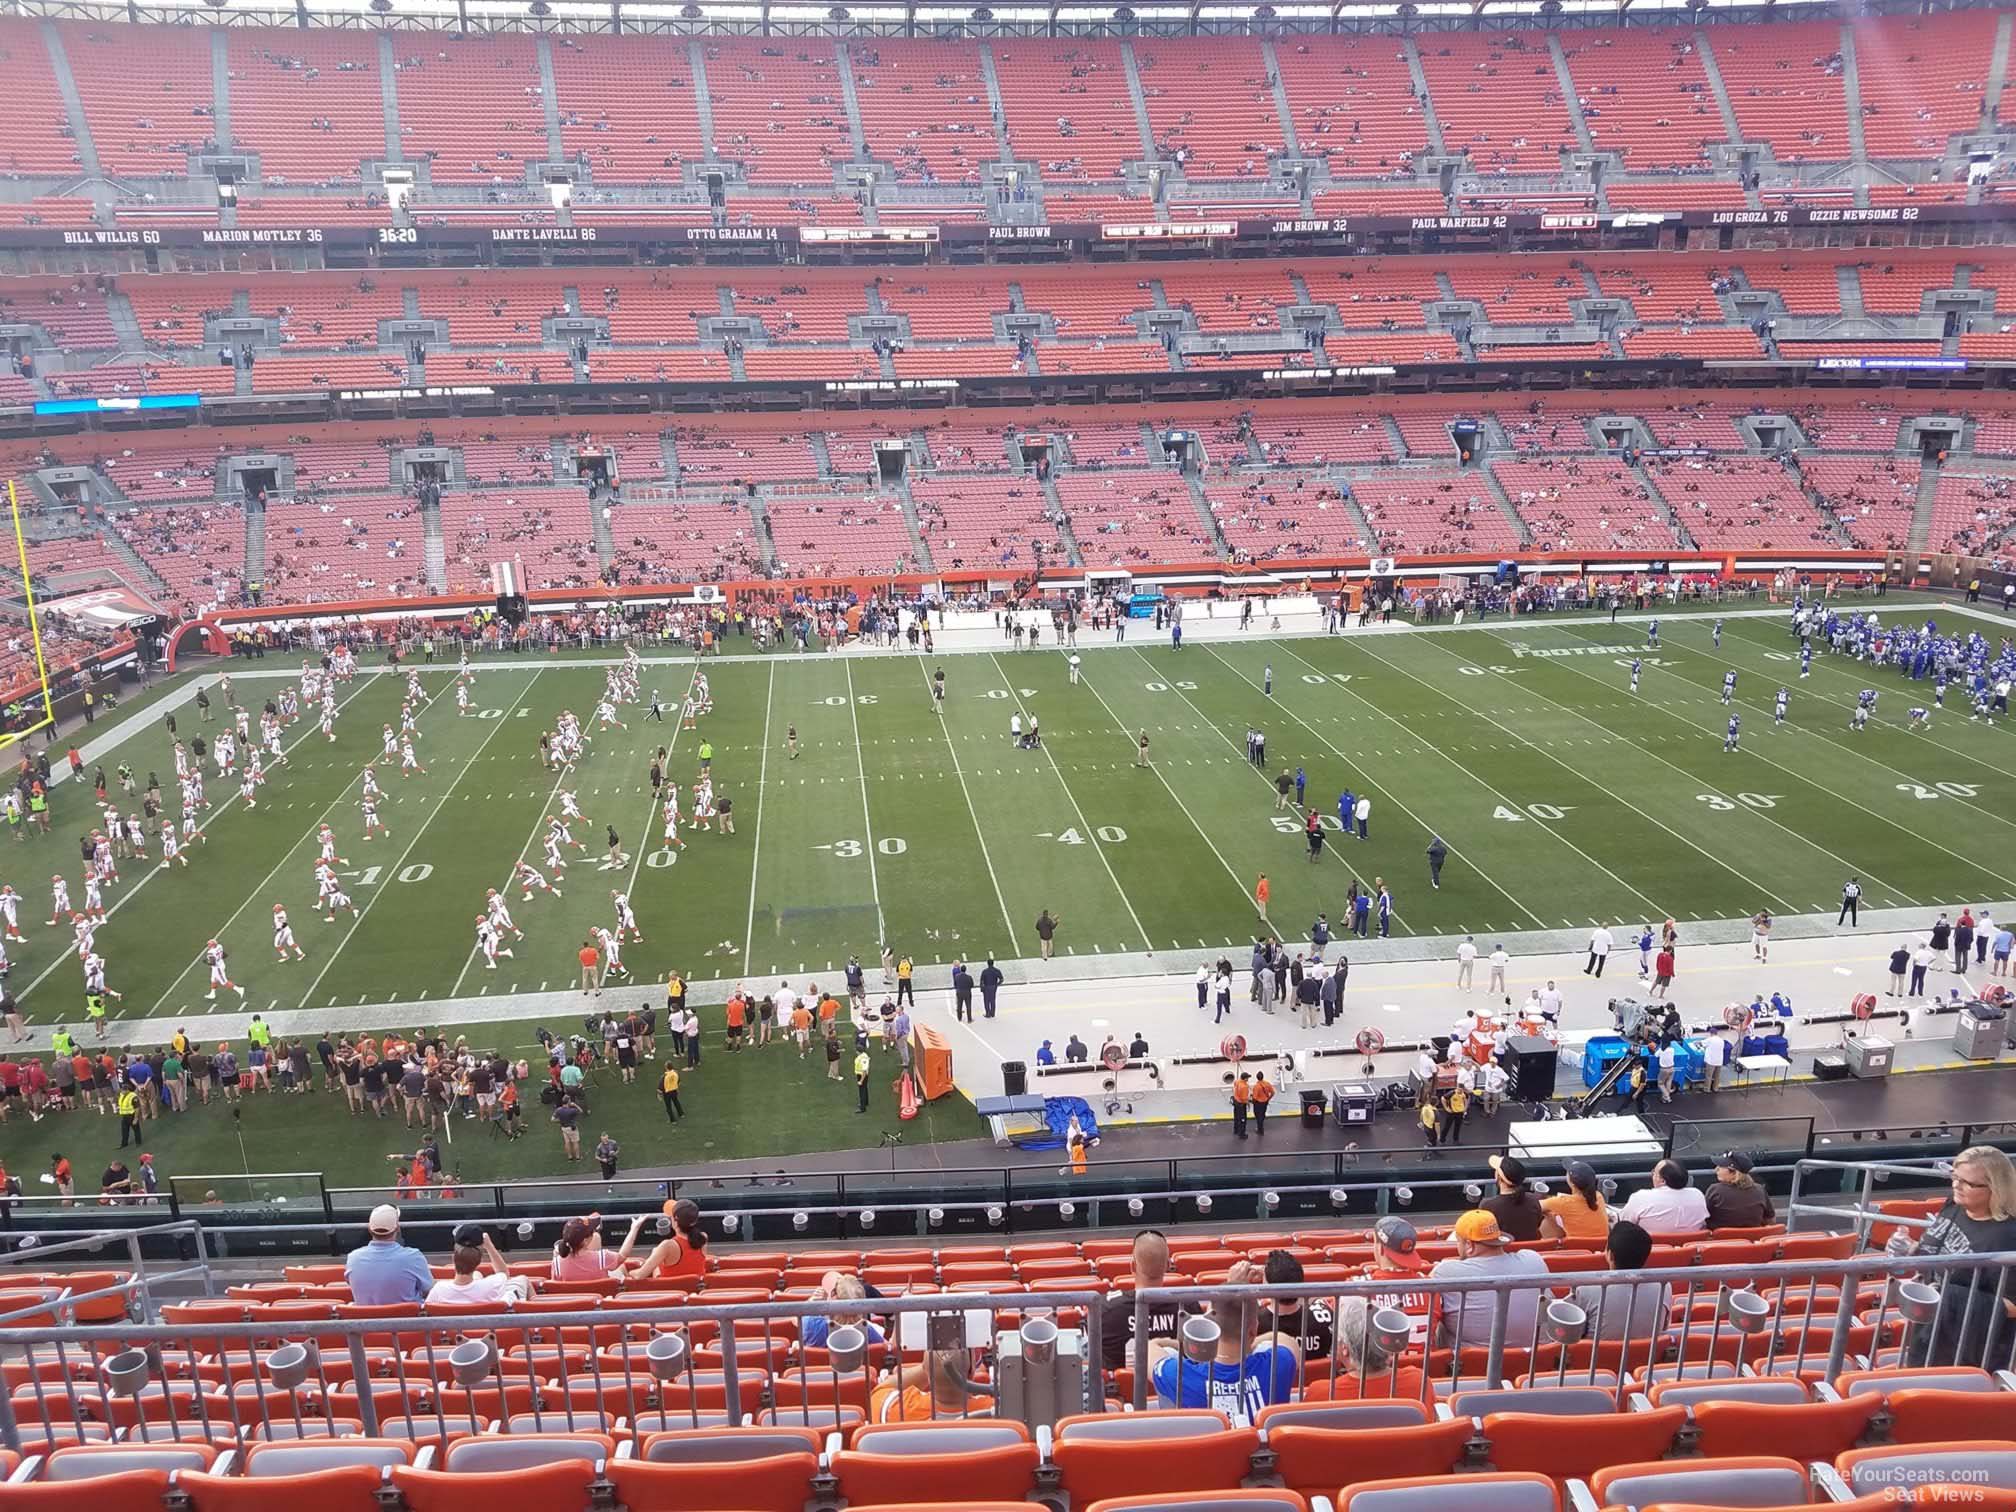 section 307, row 14 seat view  - cleveland browns stadium